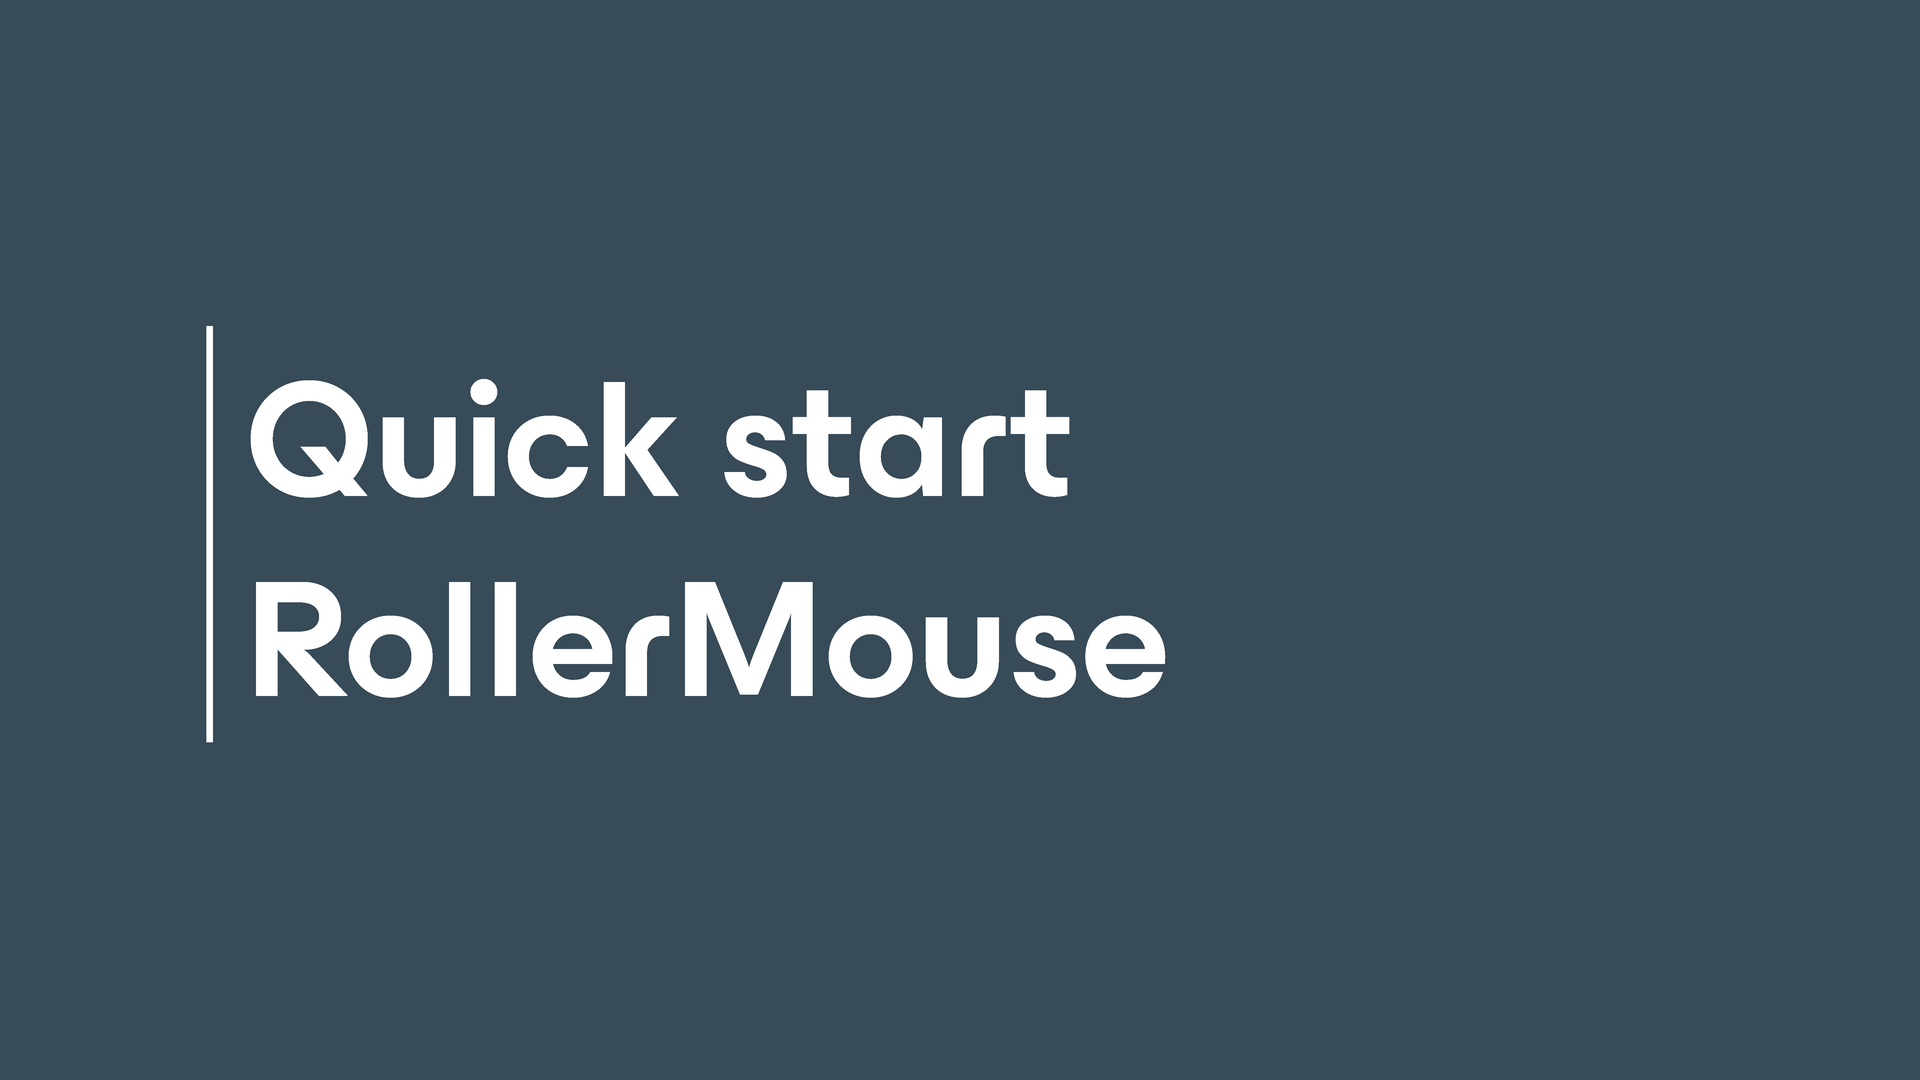 Quick Start RollerMouse